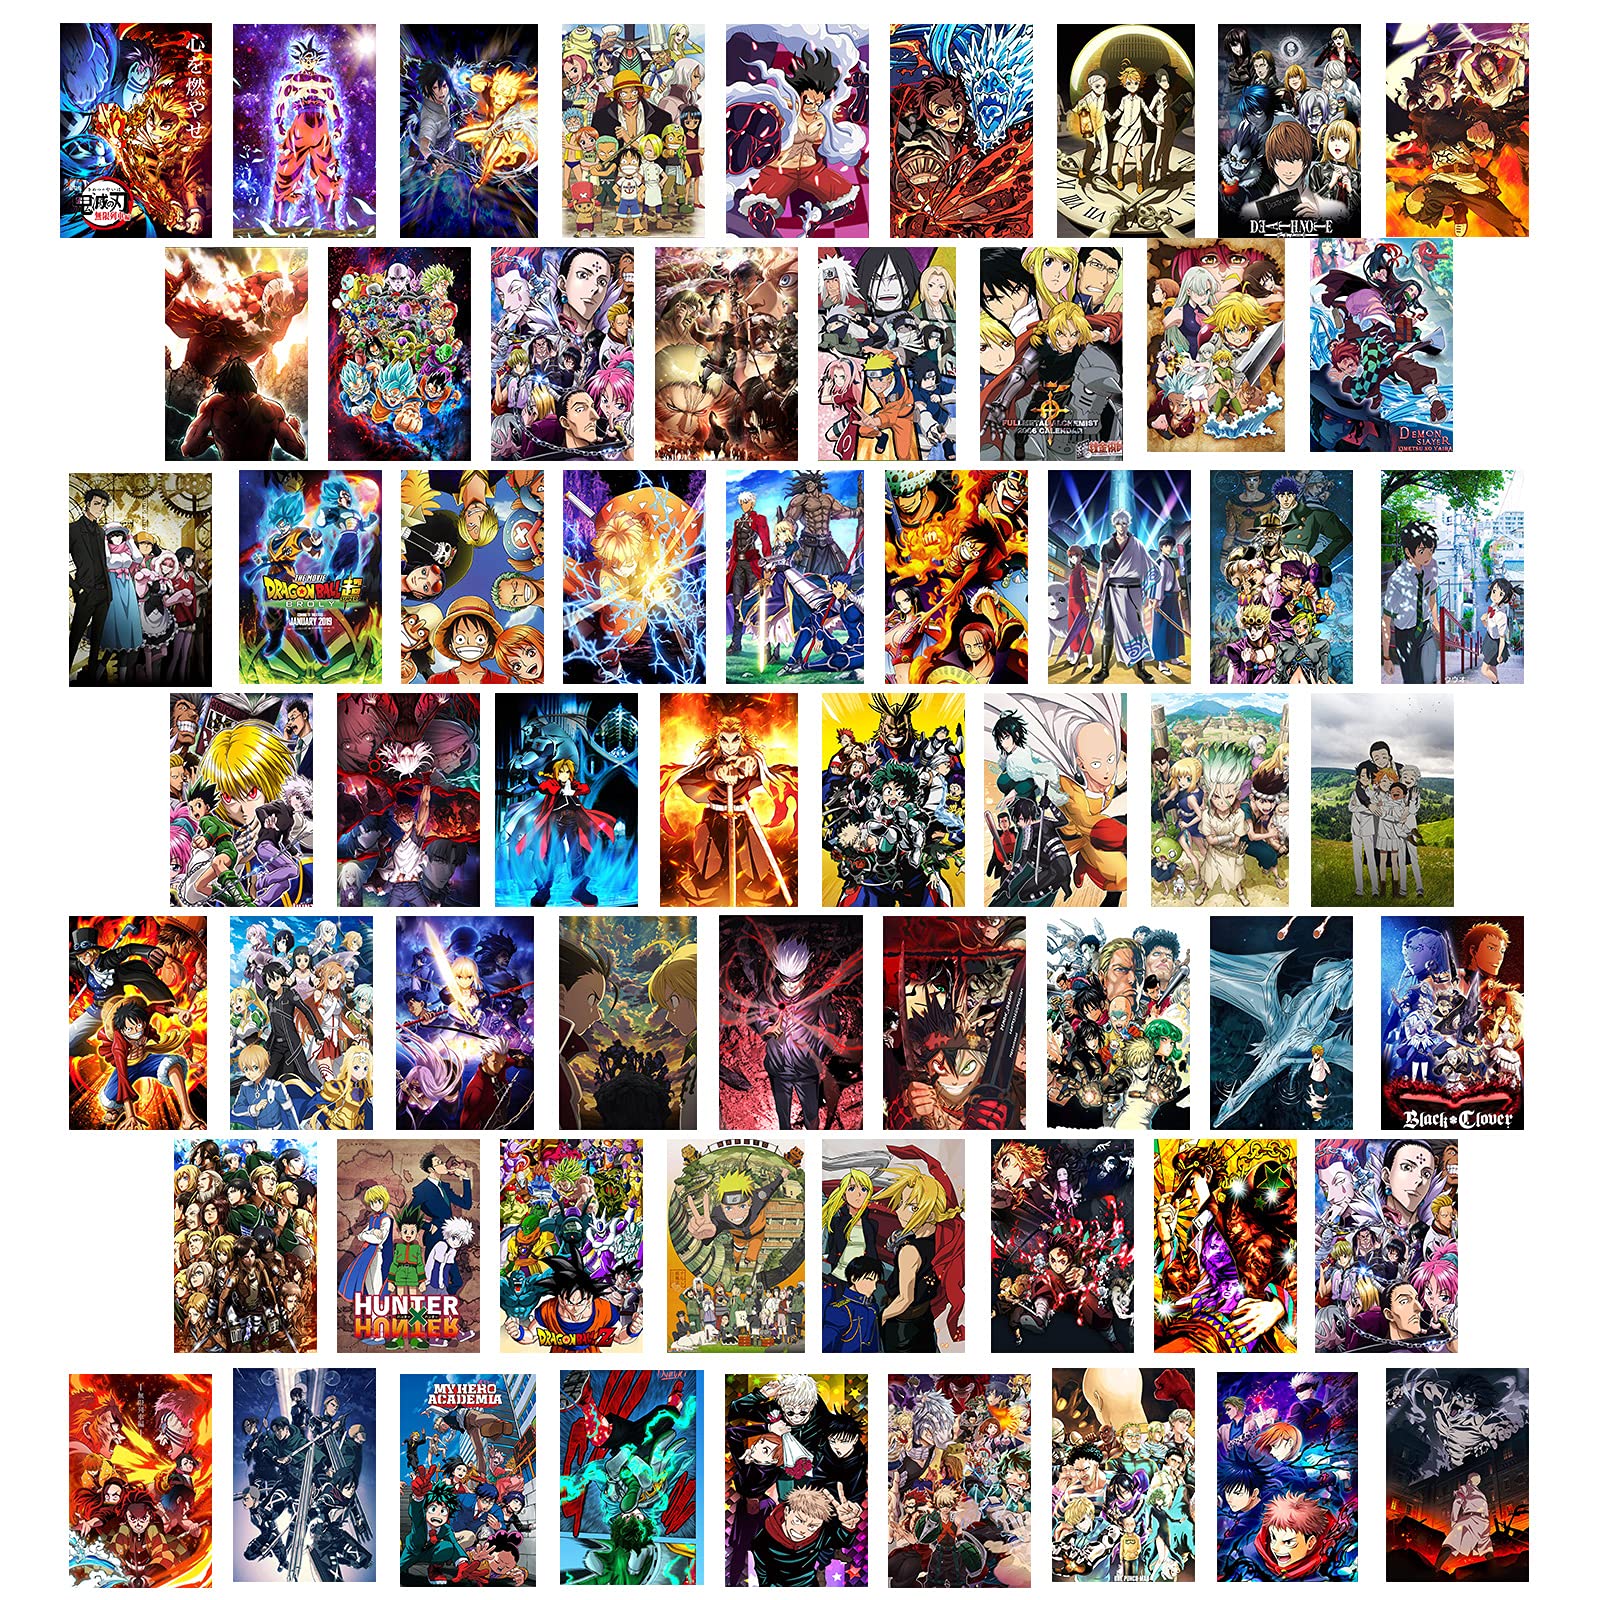 50 PCS Laincore/anime Wall Collage Kit DIGITAL DOWNLOAD - Etsy